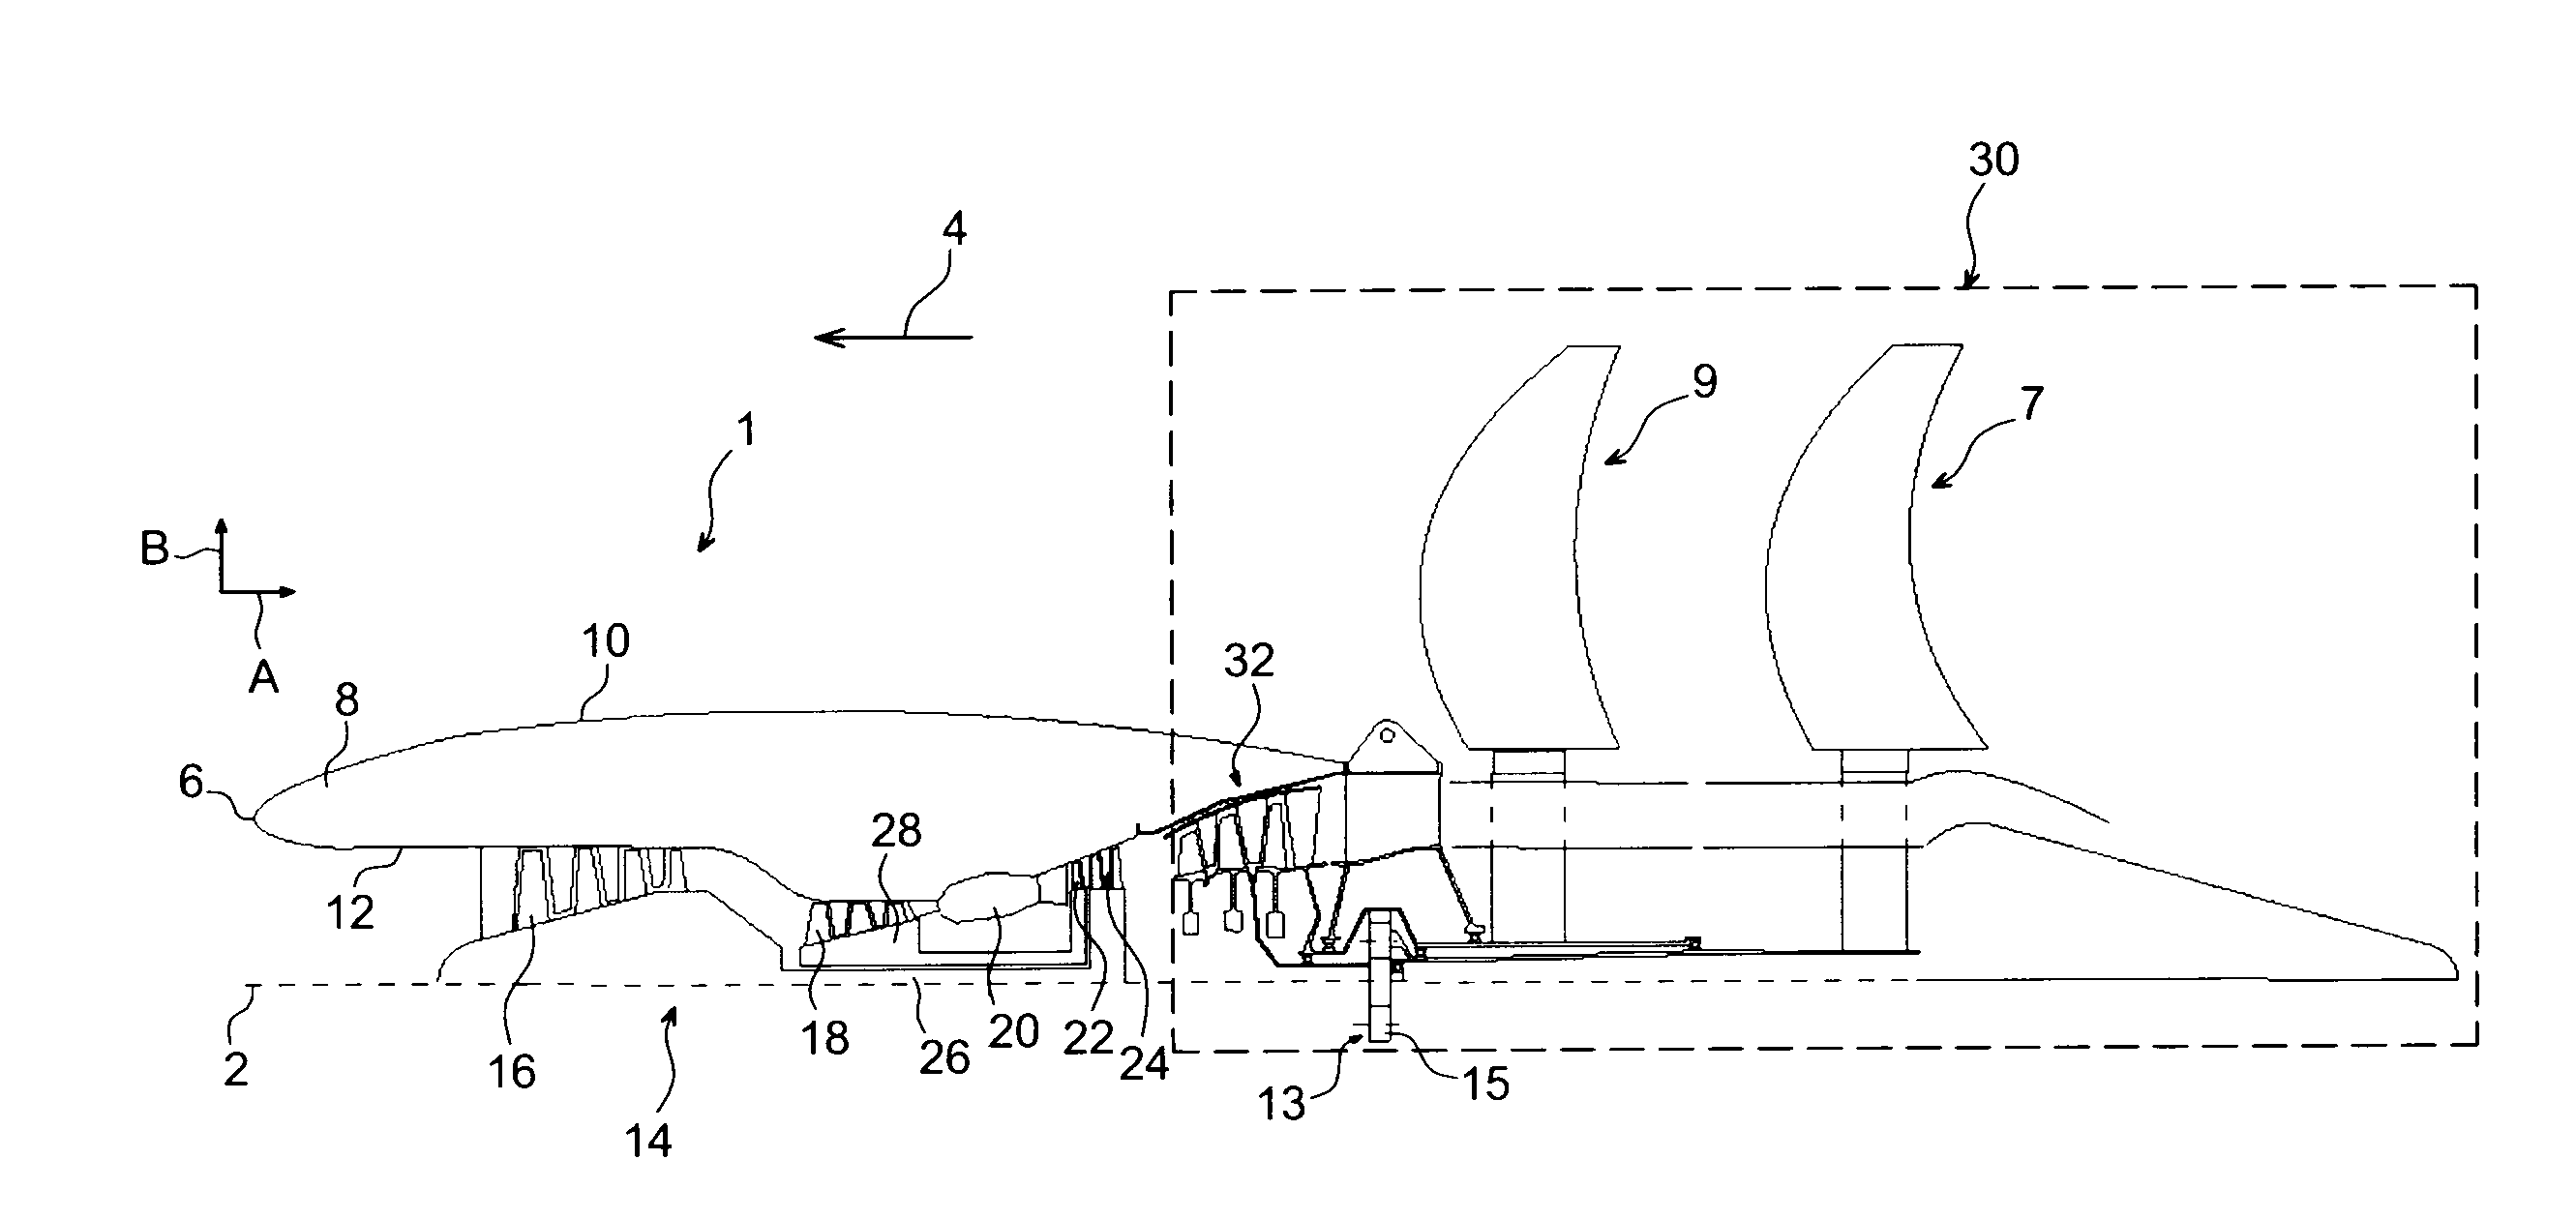 System of contra-rotating propellers driven by a planetary gear train providing a balanced distribution of torque between the two propellers